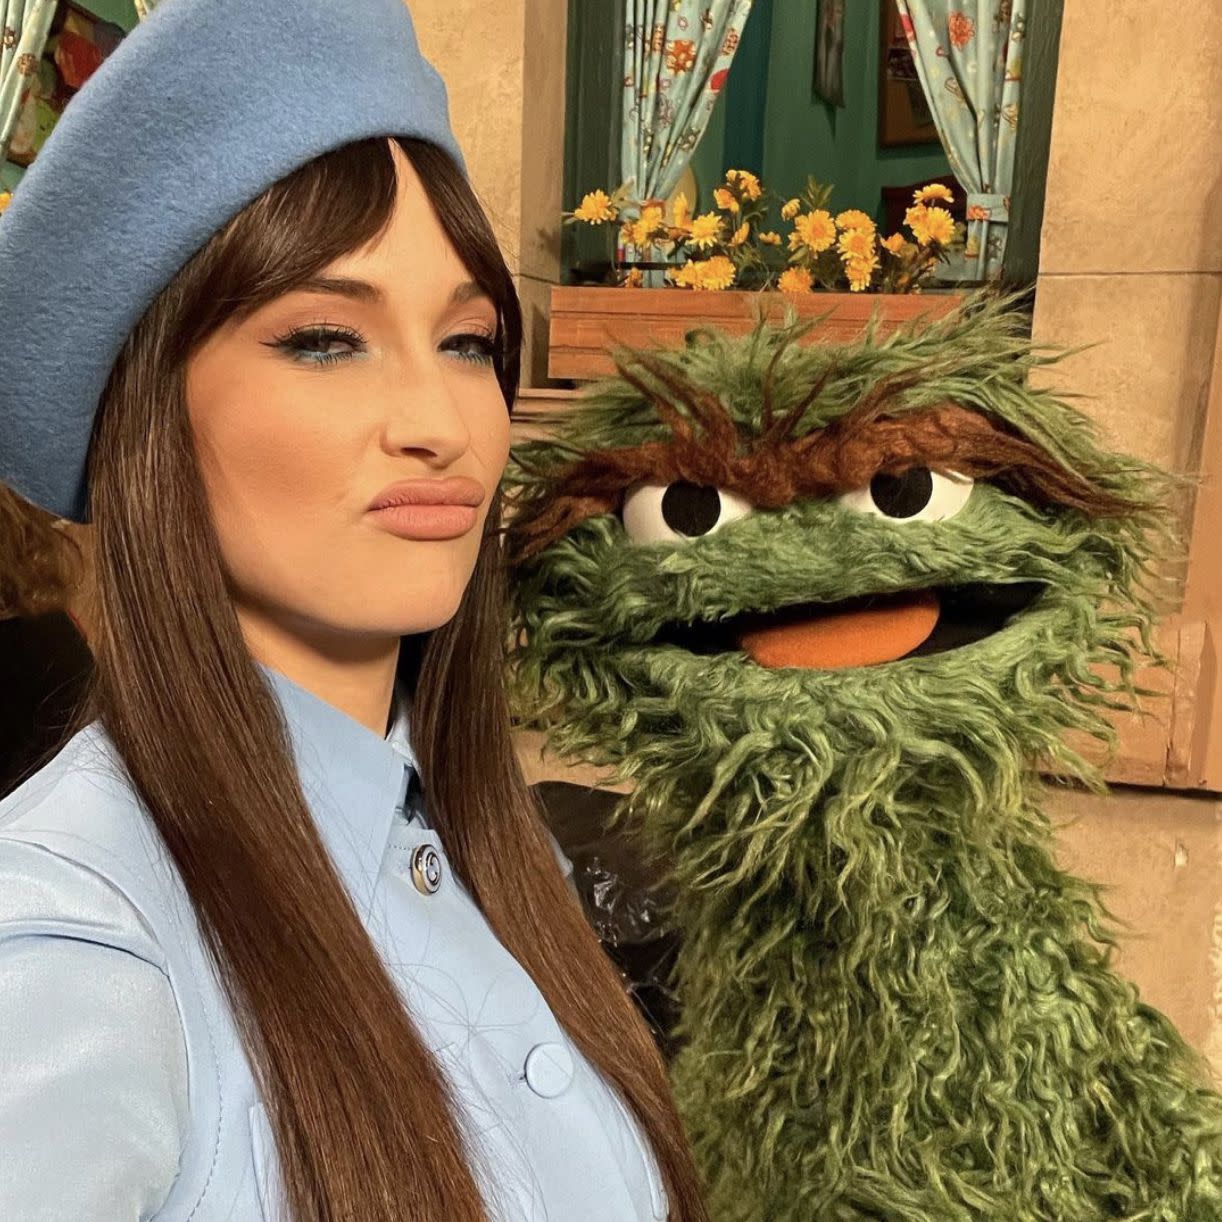 "Rainbow" singer Kacey Musgraves snapped a selfie with Oscar the Grouch while on set of "Sesame Street" on Wednesday, Dec. 16, 2020. "SEE YOU ON THE STREET! @sesamestreet @elmo #Season52"